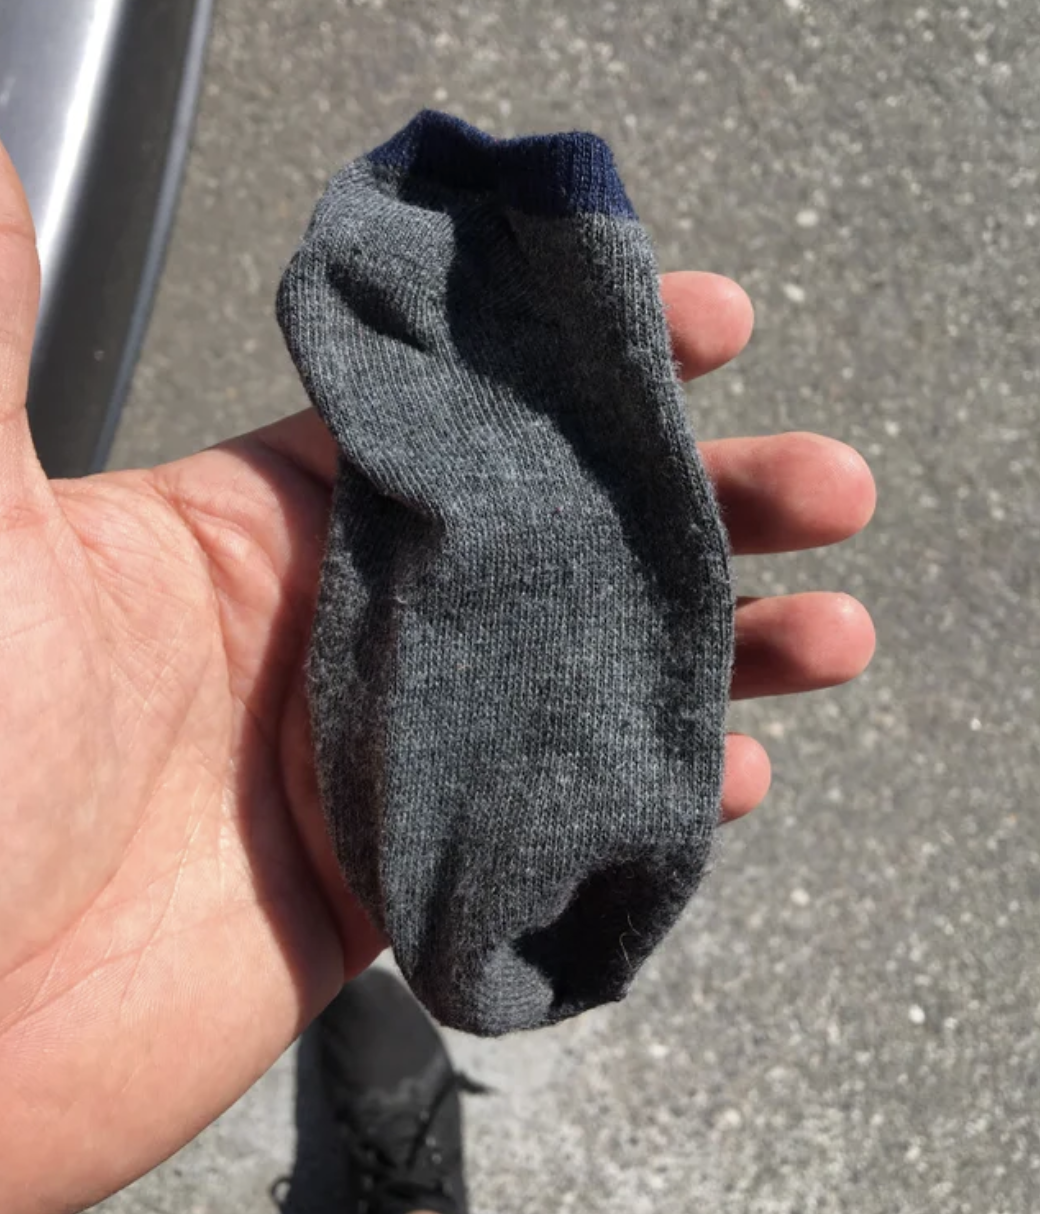 A hand holding a small sock